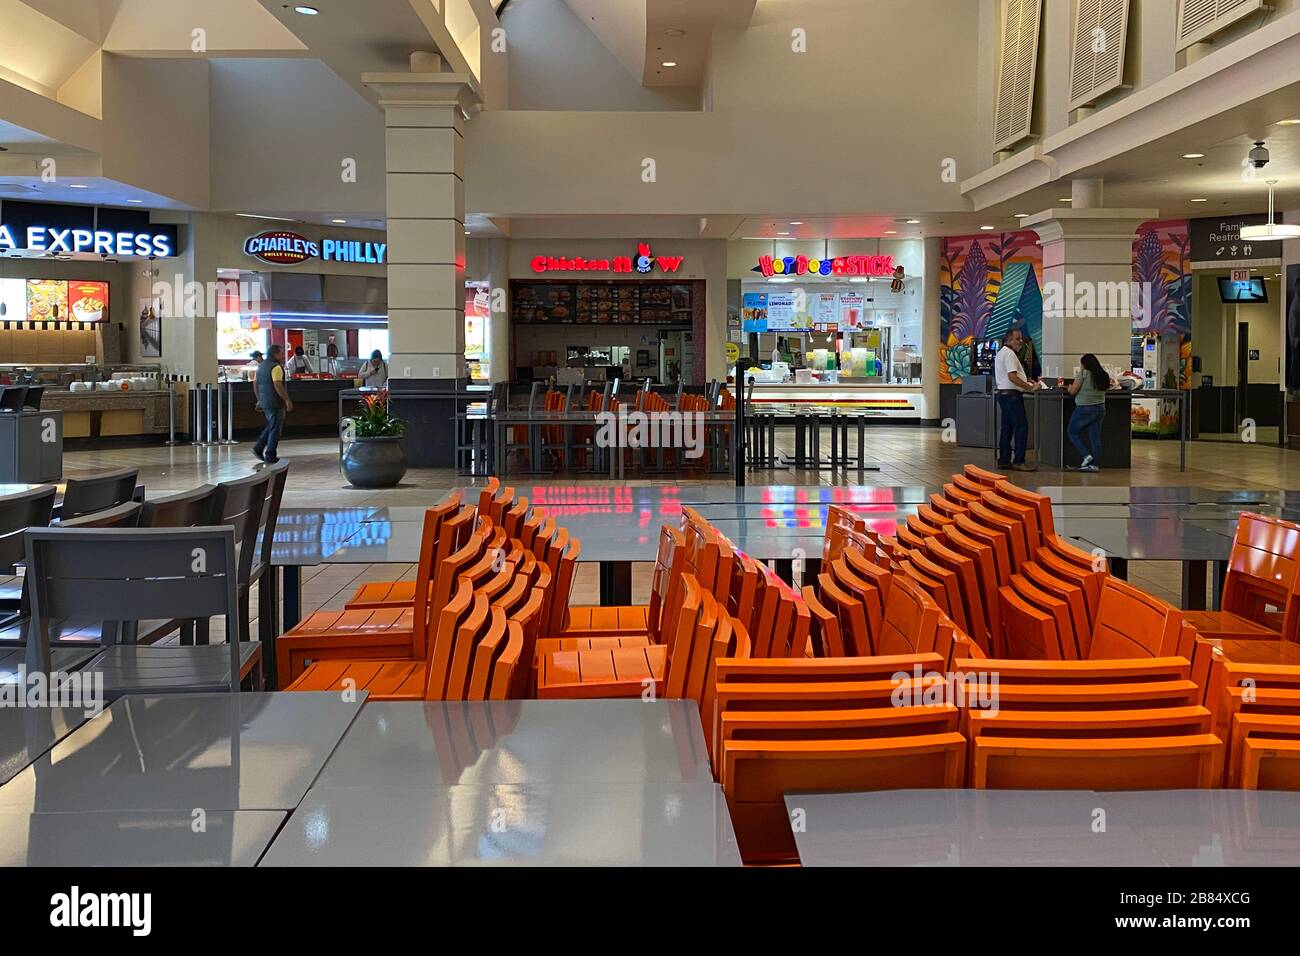 General overall view of the food court at The Shops at Montebello mall in  the wake of the coronavirus pandemic outbreak, Wednesday, March 18, 2020,  in Montebello, Calif. California Governor Gavin Newsom